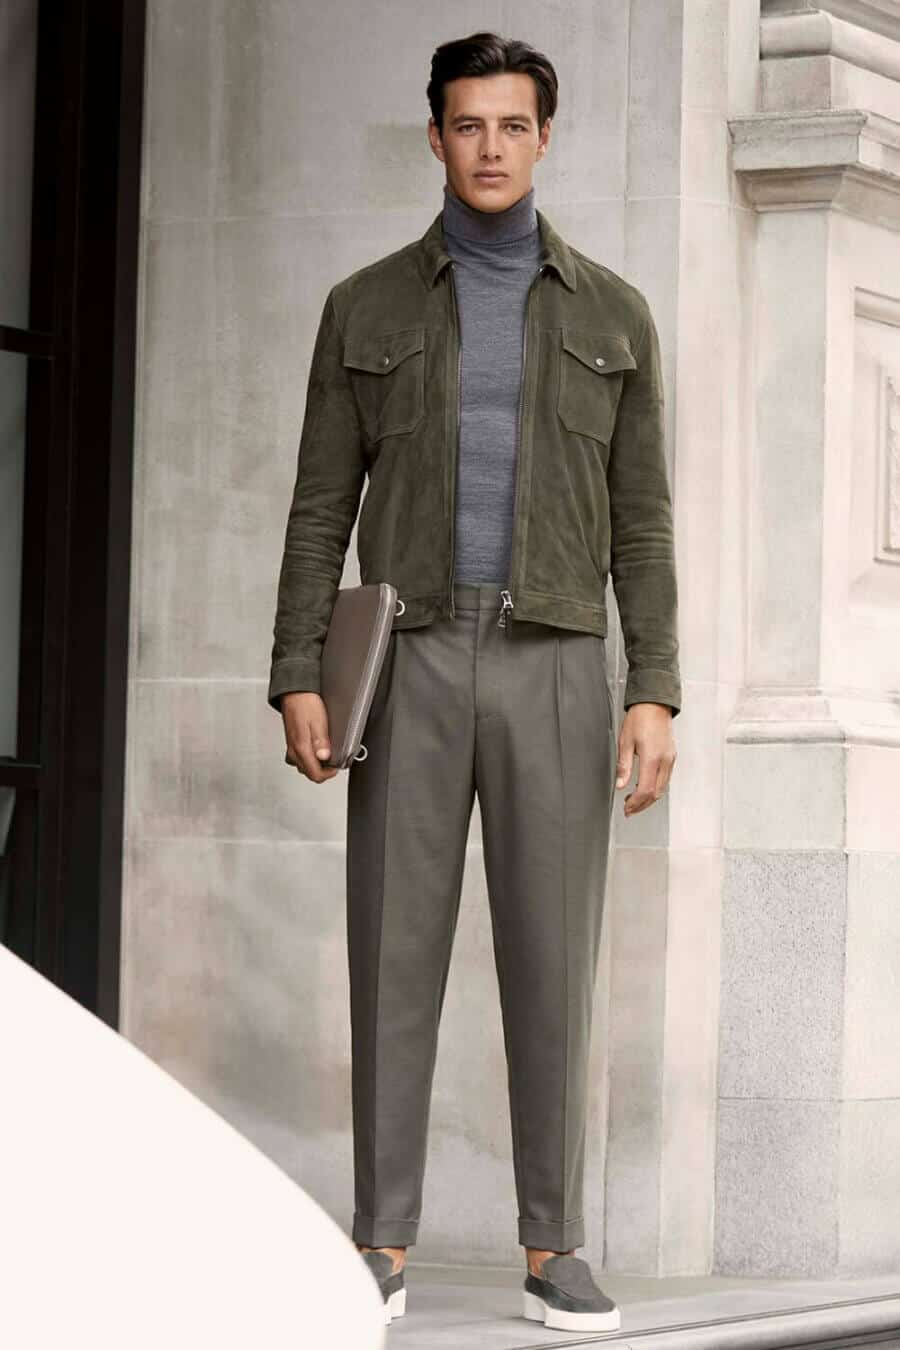 Men's turtleneck outfit with suede trucker jacket and sneakers